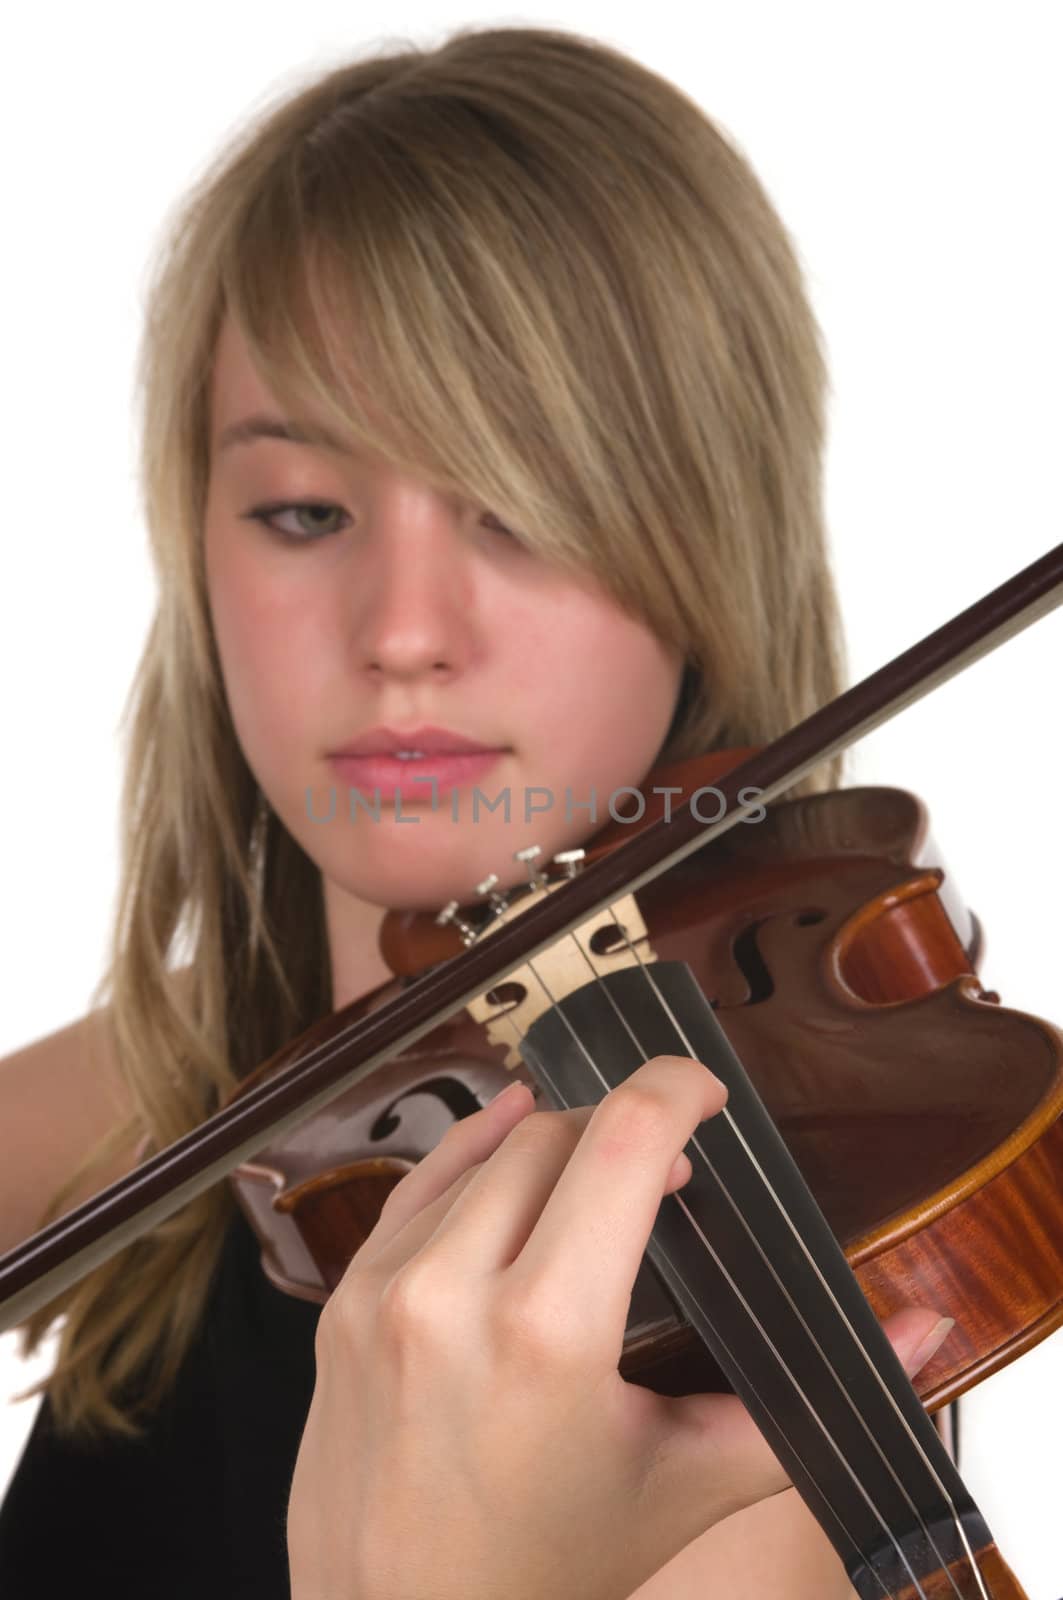 A beautiful teenager playing her violin